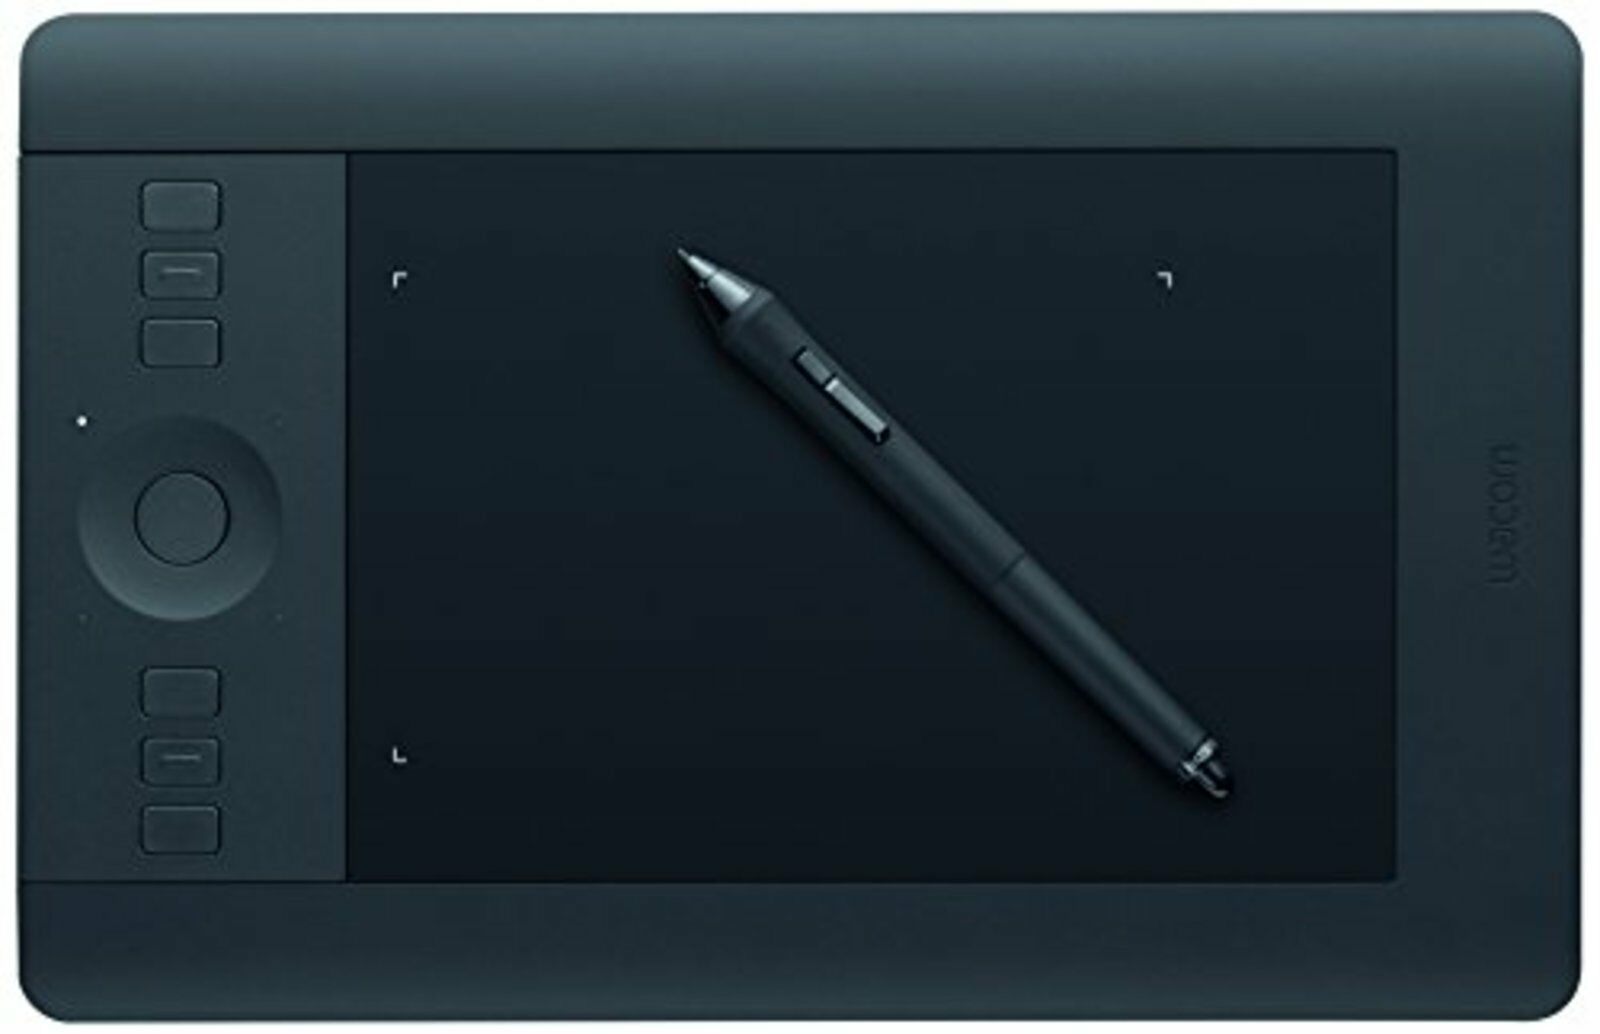 Wacom Intuos Pro Professional Pen & Touch Tablet (Small) PTH451/K1 Japan EMS F/S